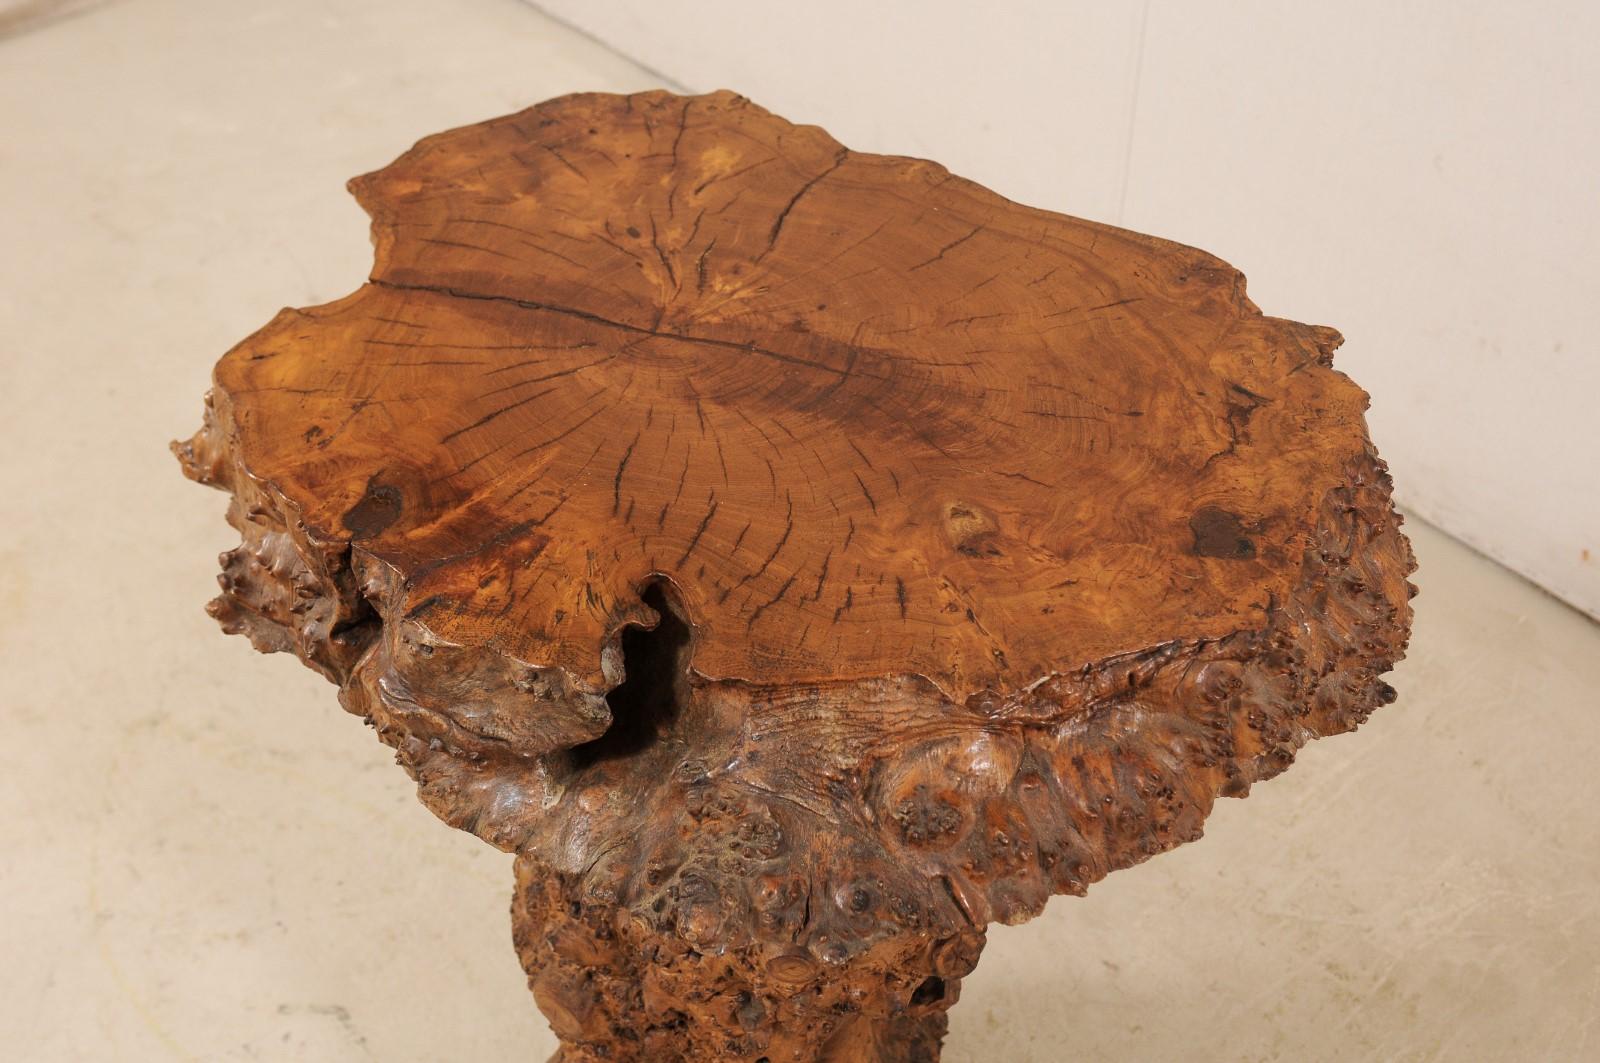 European Live-Edge Burl Side Table with Slab Top & Knobby Texture, Early 20th C. For Sale 2